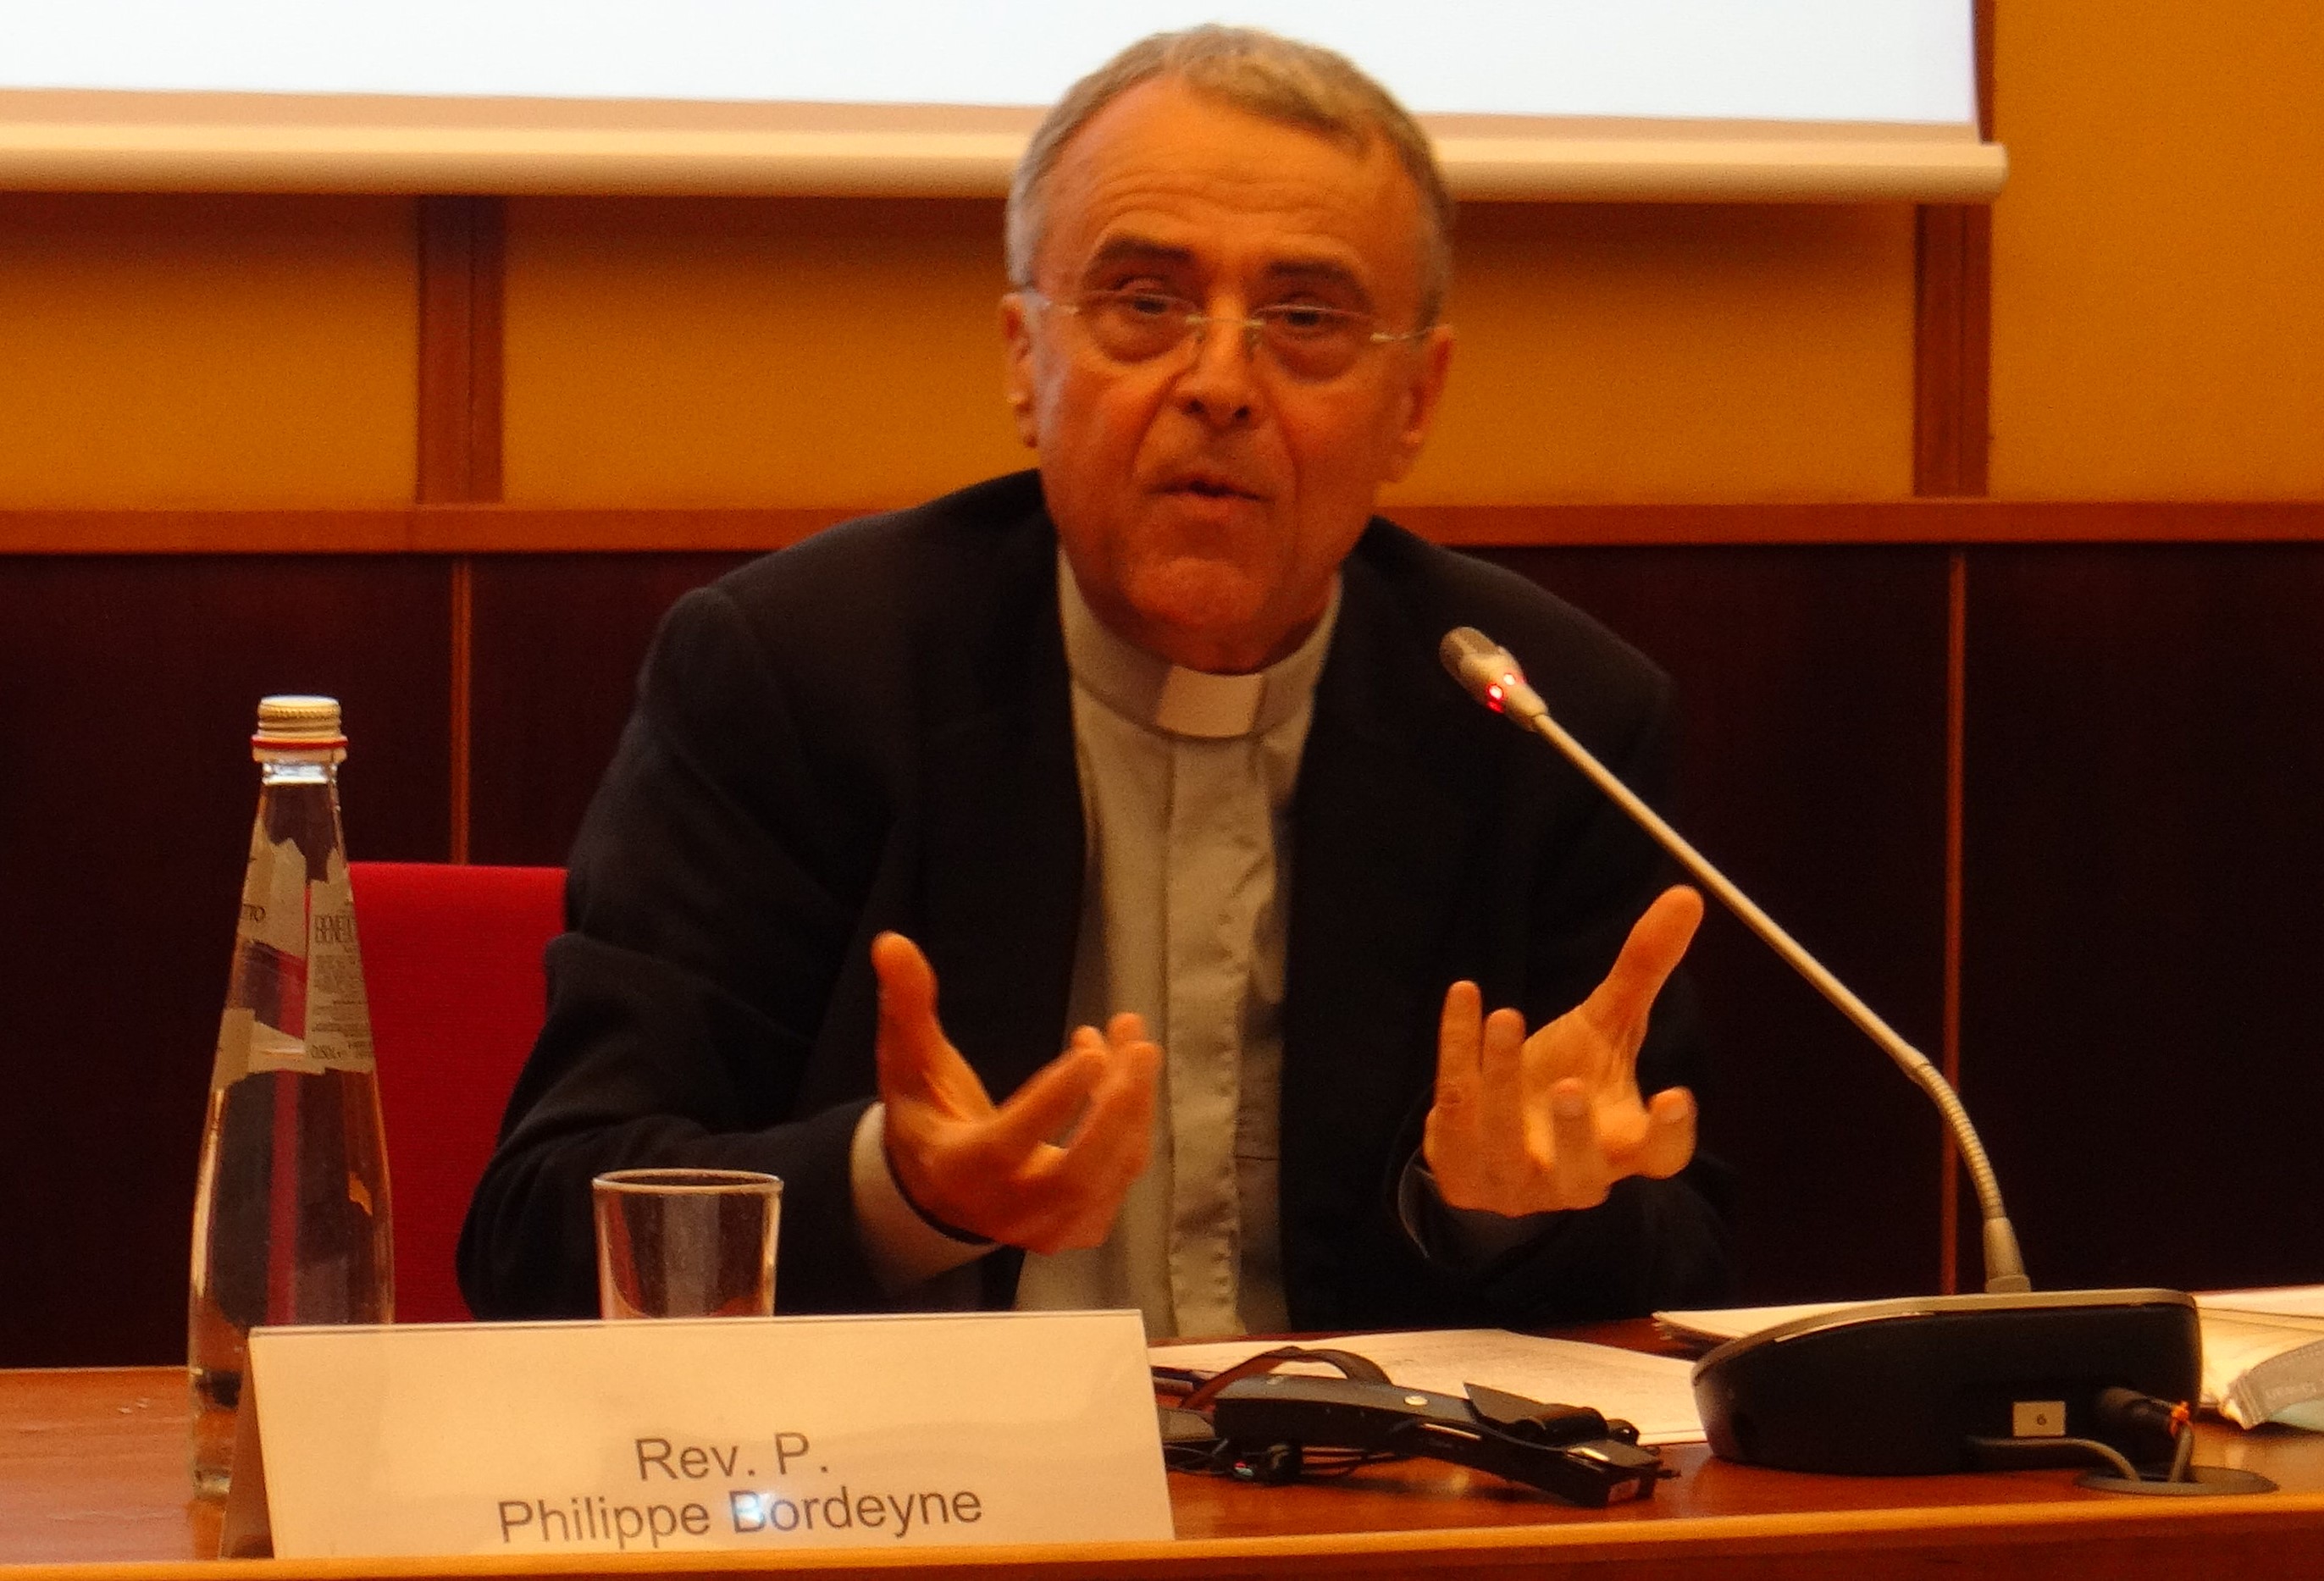 Fr. Philippe Bordeyne, rector of the Catholic Institute of Paris, speaks at the conference on Amoris Laetitia at Rome's Gregorian University. (Courtesy of the Pontifical Gregorian University/Arnaldo Casali)